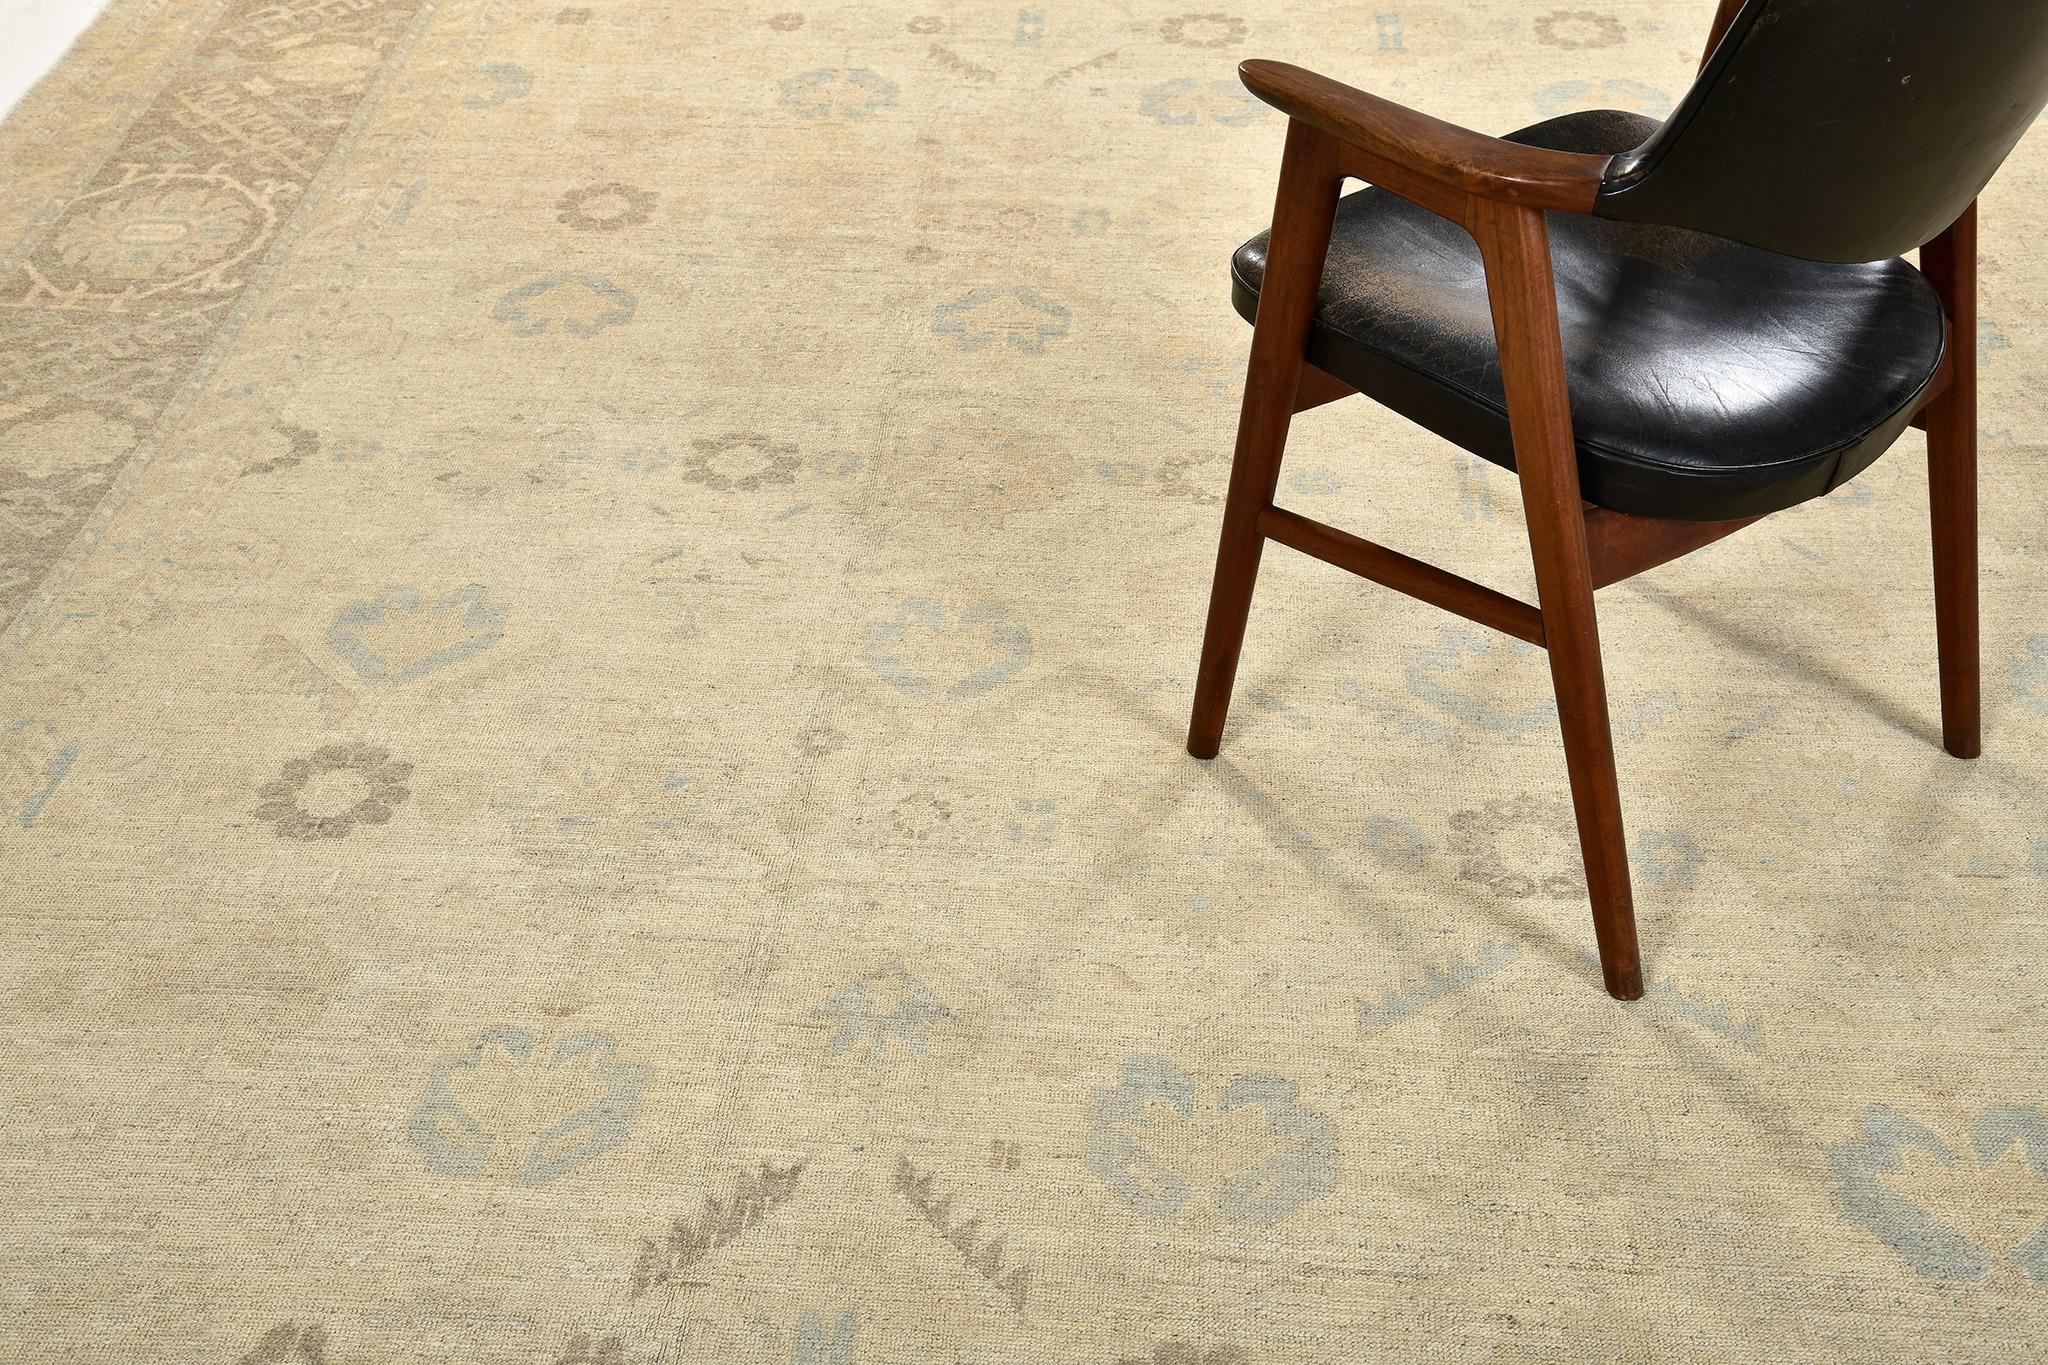 A captivating sandy beige and dusty blue muted revival of Oushak design rug that was made from the finest selection of natural dye and hand spun wool. The rustic character of this breathtaking rug will tone down a formal design scheme and give your